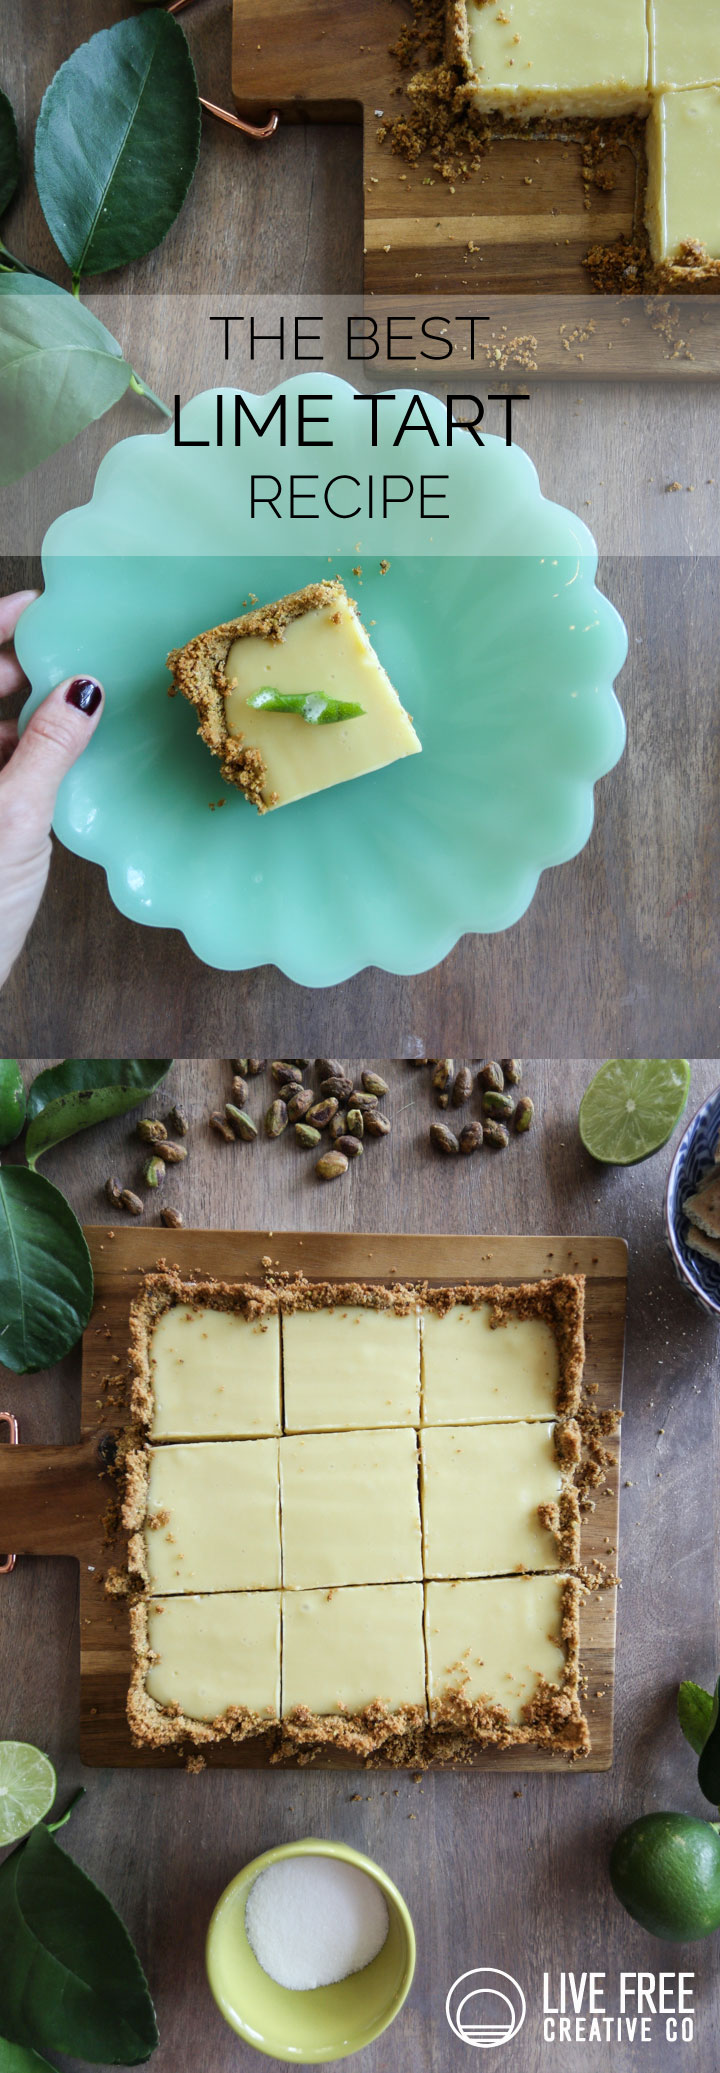 The Best Lime Tart Recipe | Live Free Creative Co